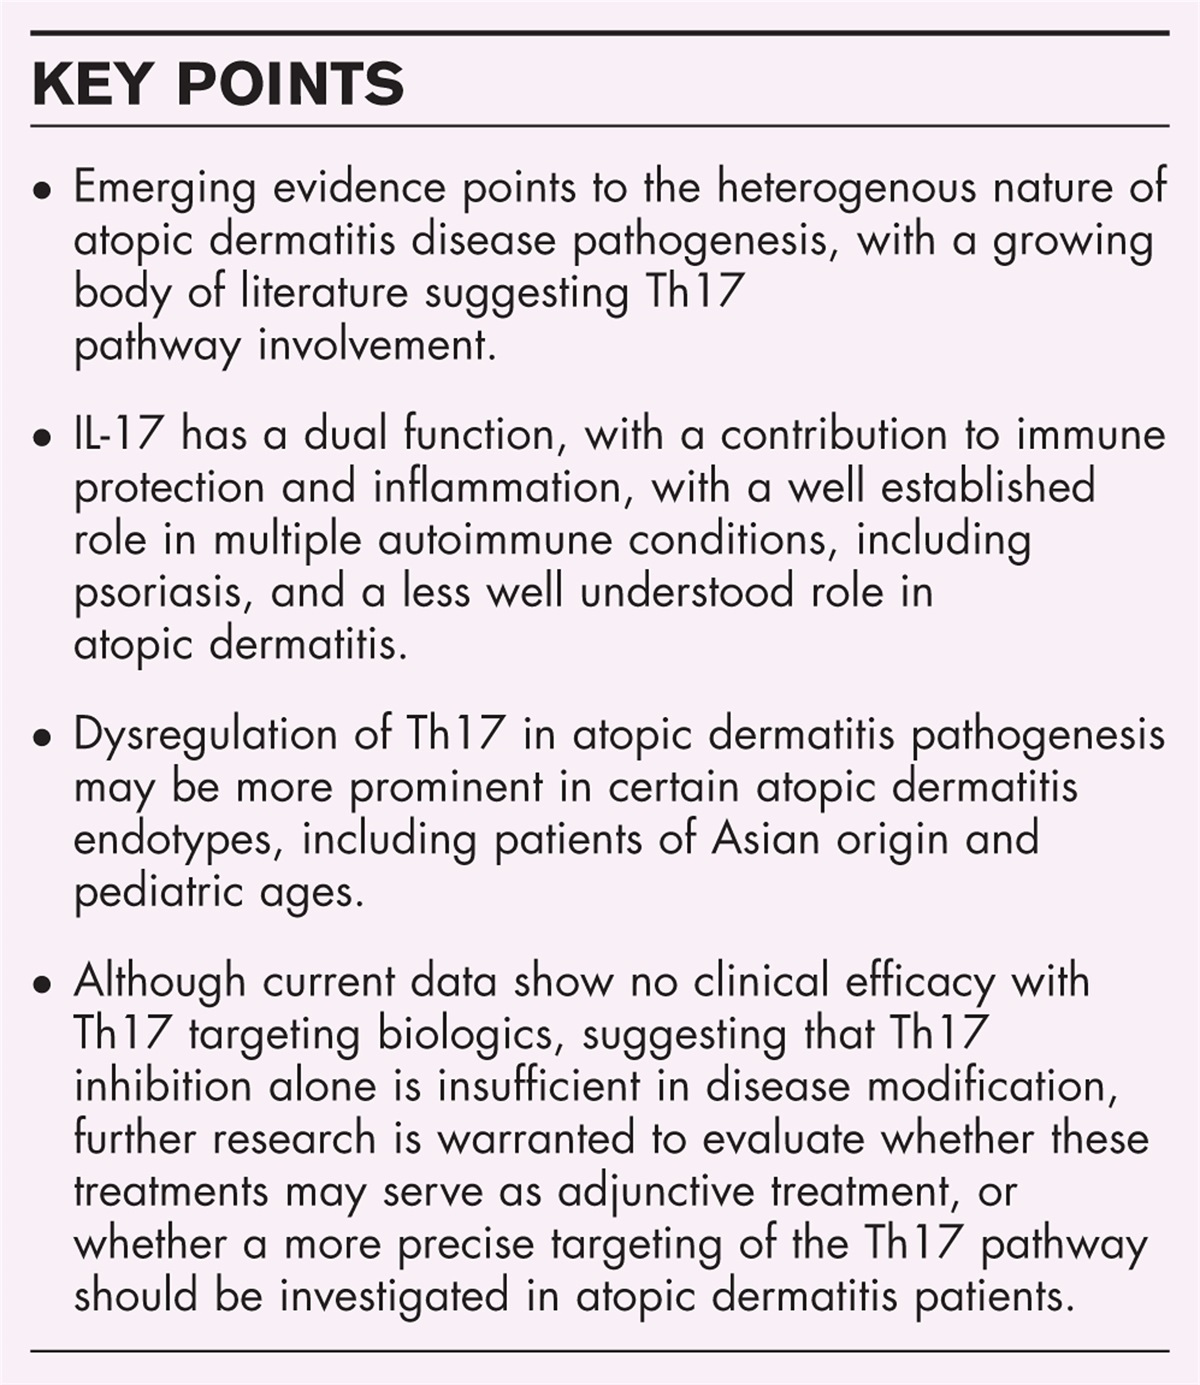 The pathogenetic role of Th17 immune response in atopic dermatitis